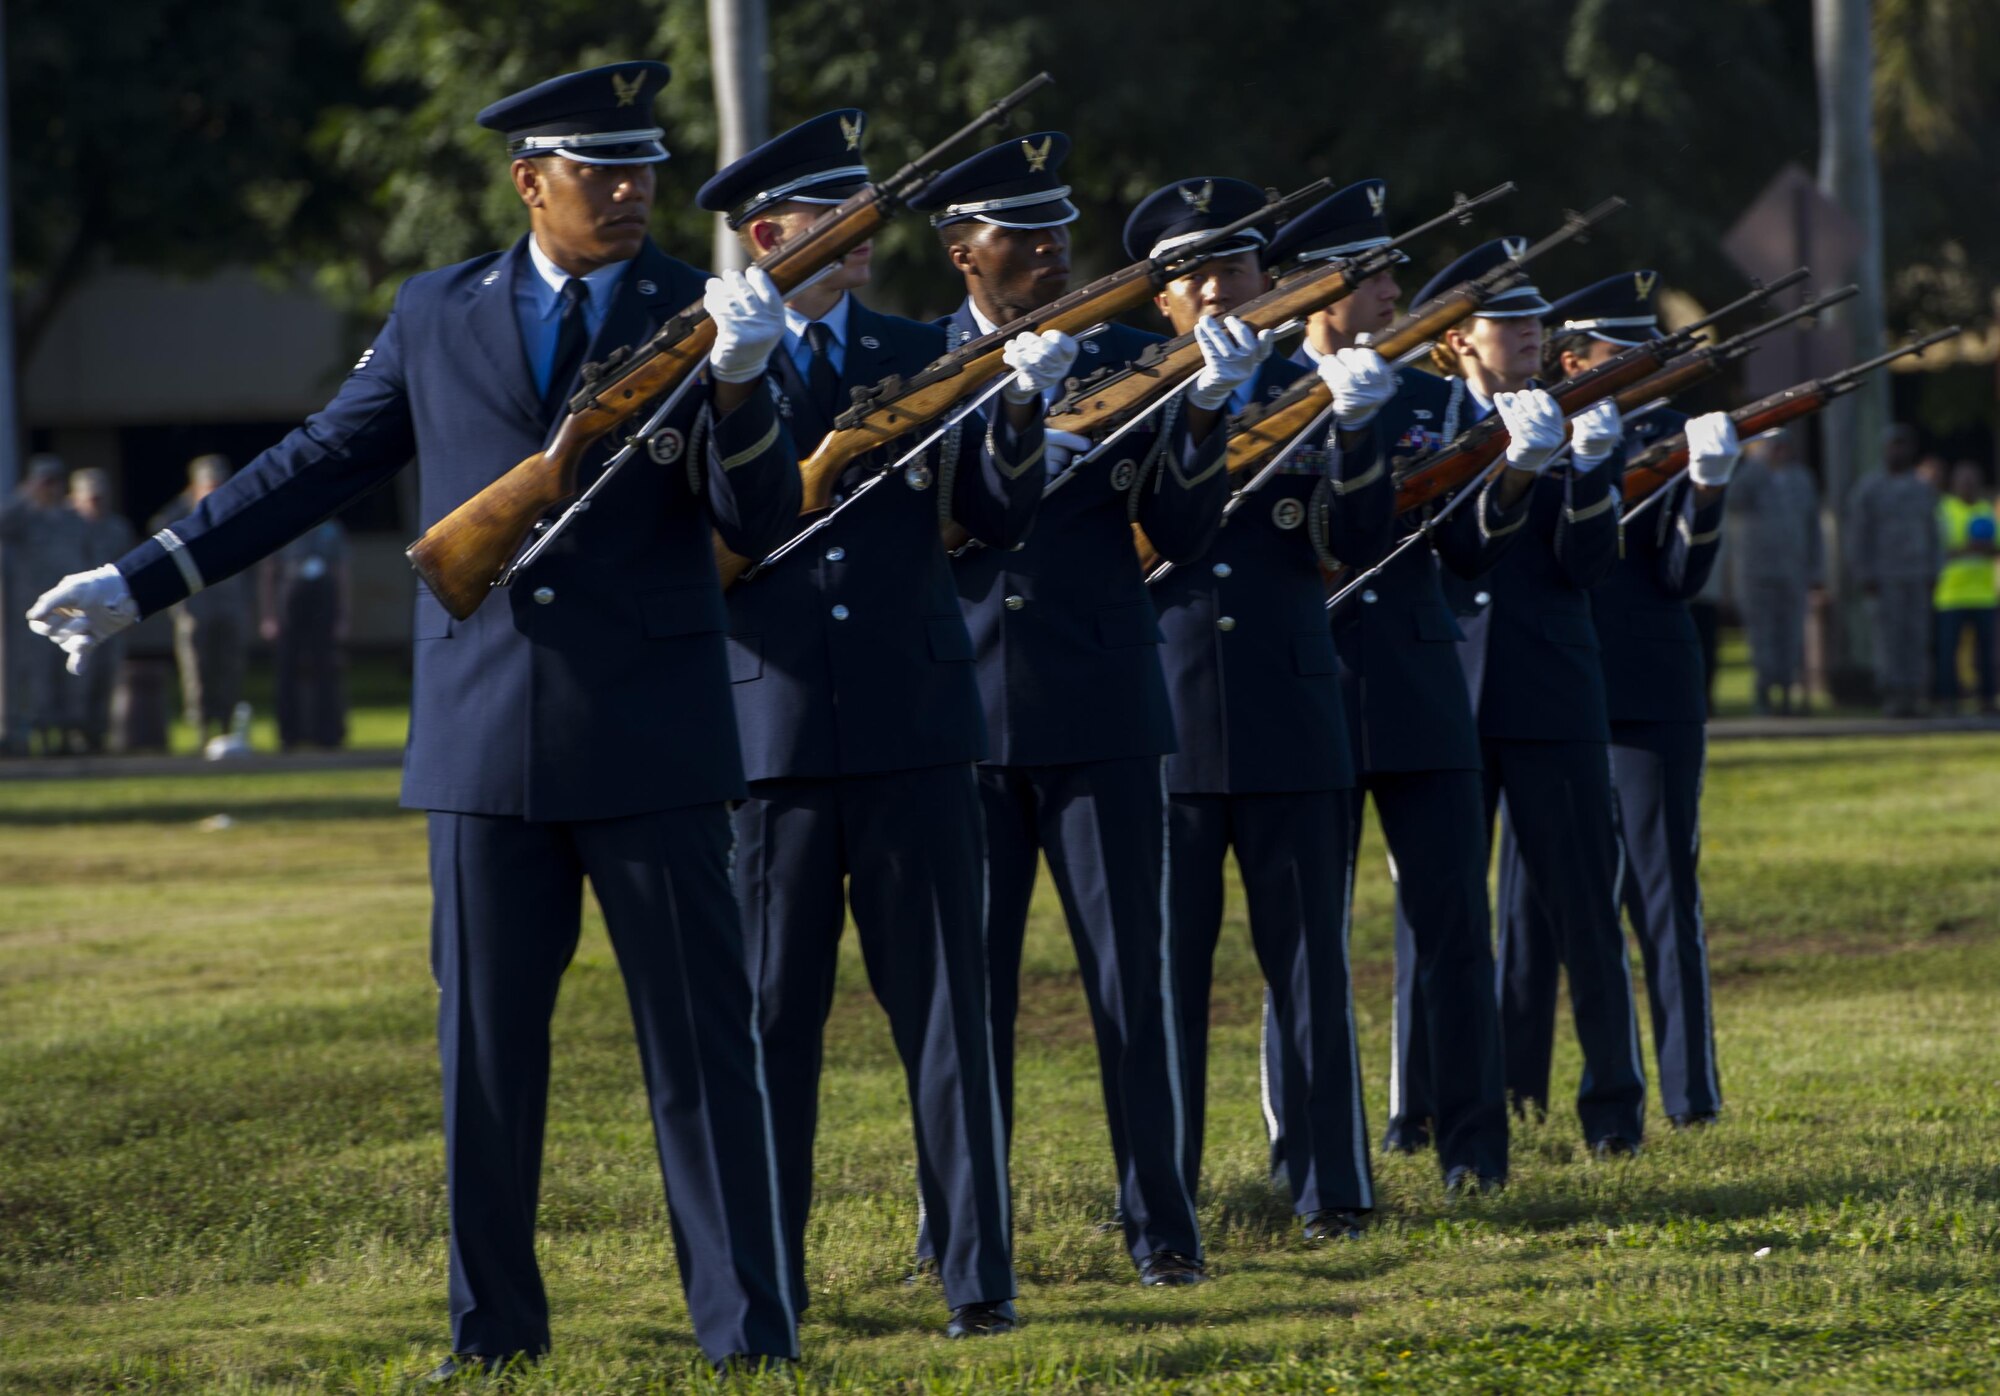 Members of the Hickam Honor Guard perform a 21-Gun Salute during the 75th Commemoration of the Dec. 7, 1941 attack on Hickam Field ceremony Dec. 7, 2016, at Joint Base Pearl Harbor-Hickam, Hawaii. The attacks on seven bases throughout Oahu precipitated America's entry into World War II, and the annual commemoration ceremony is designed to foster reflection, remembrance, and understanding for those affected by the events that took place 75 years ago. (U.S. Air Force photo by Tech. Sgt. Nathan Allen)